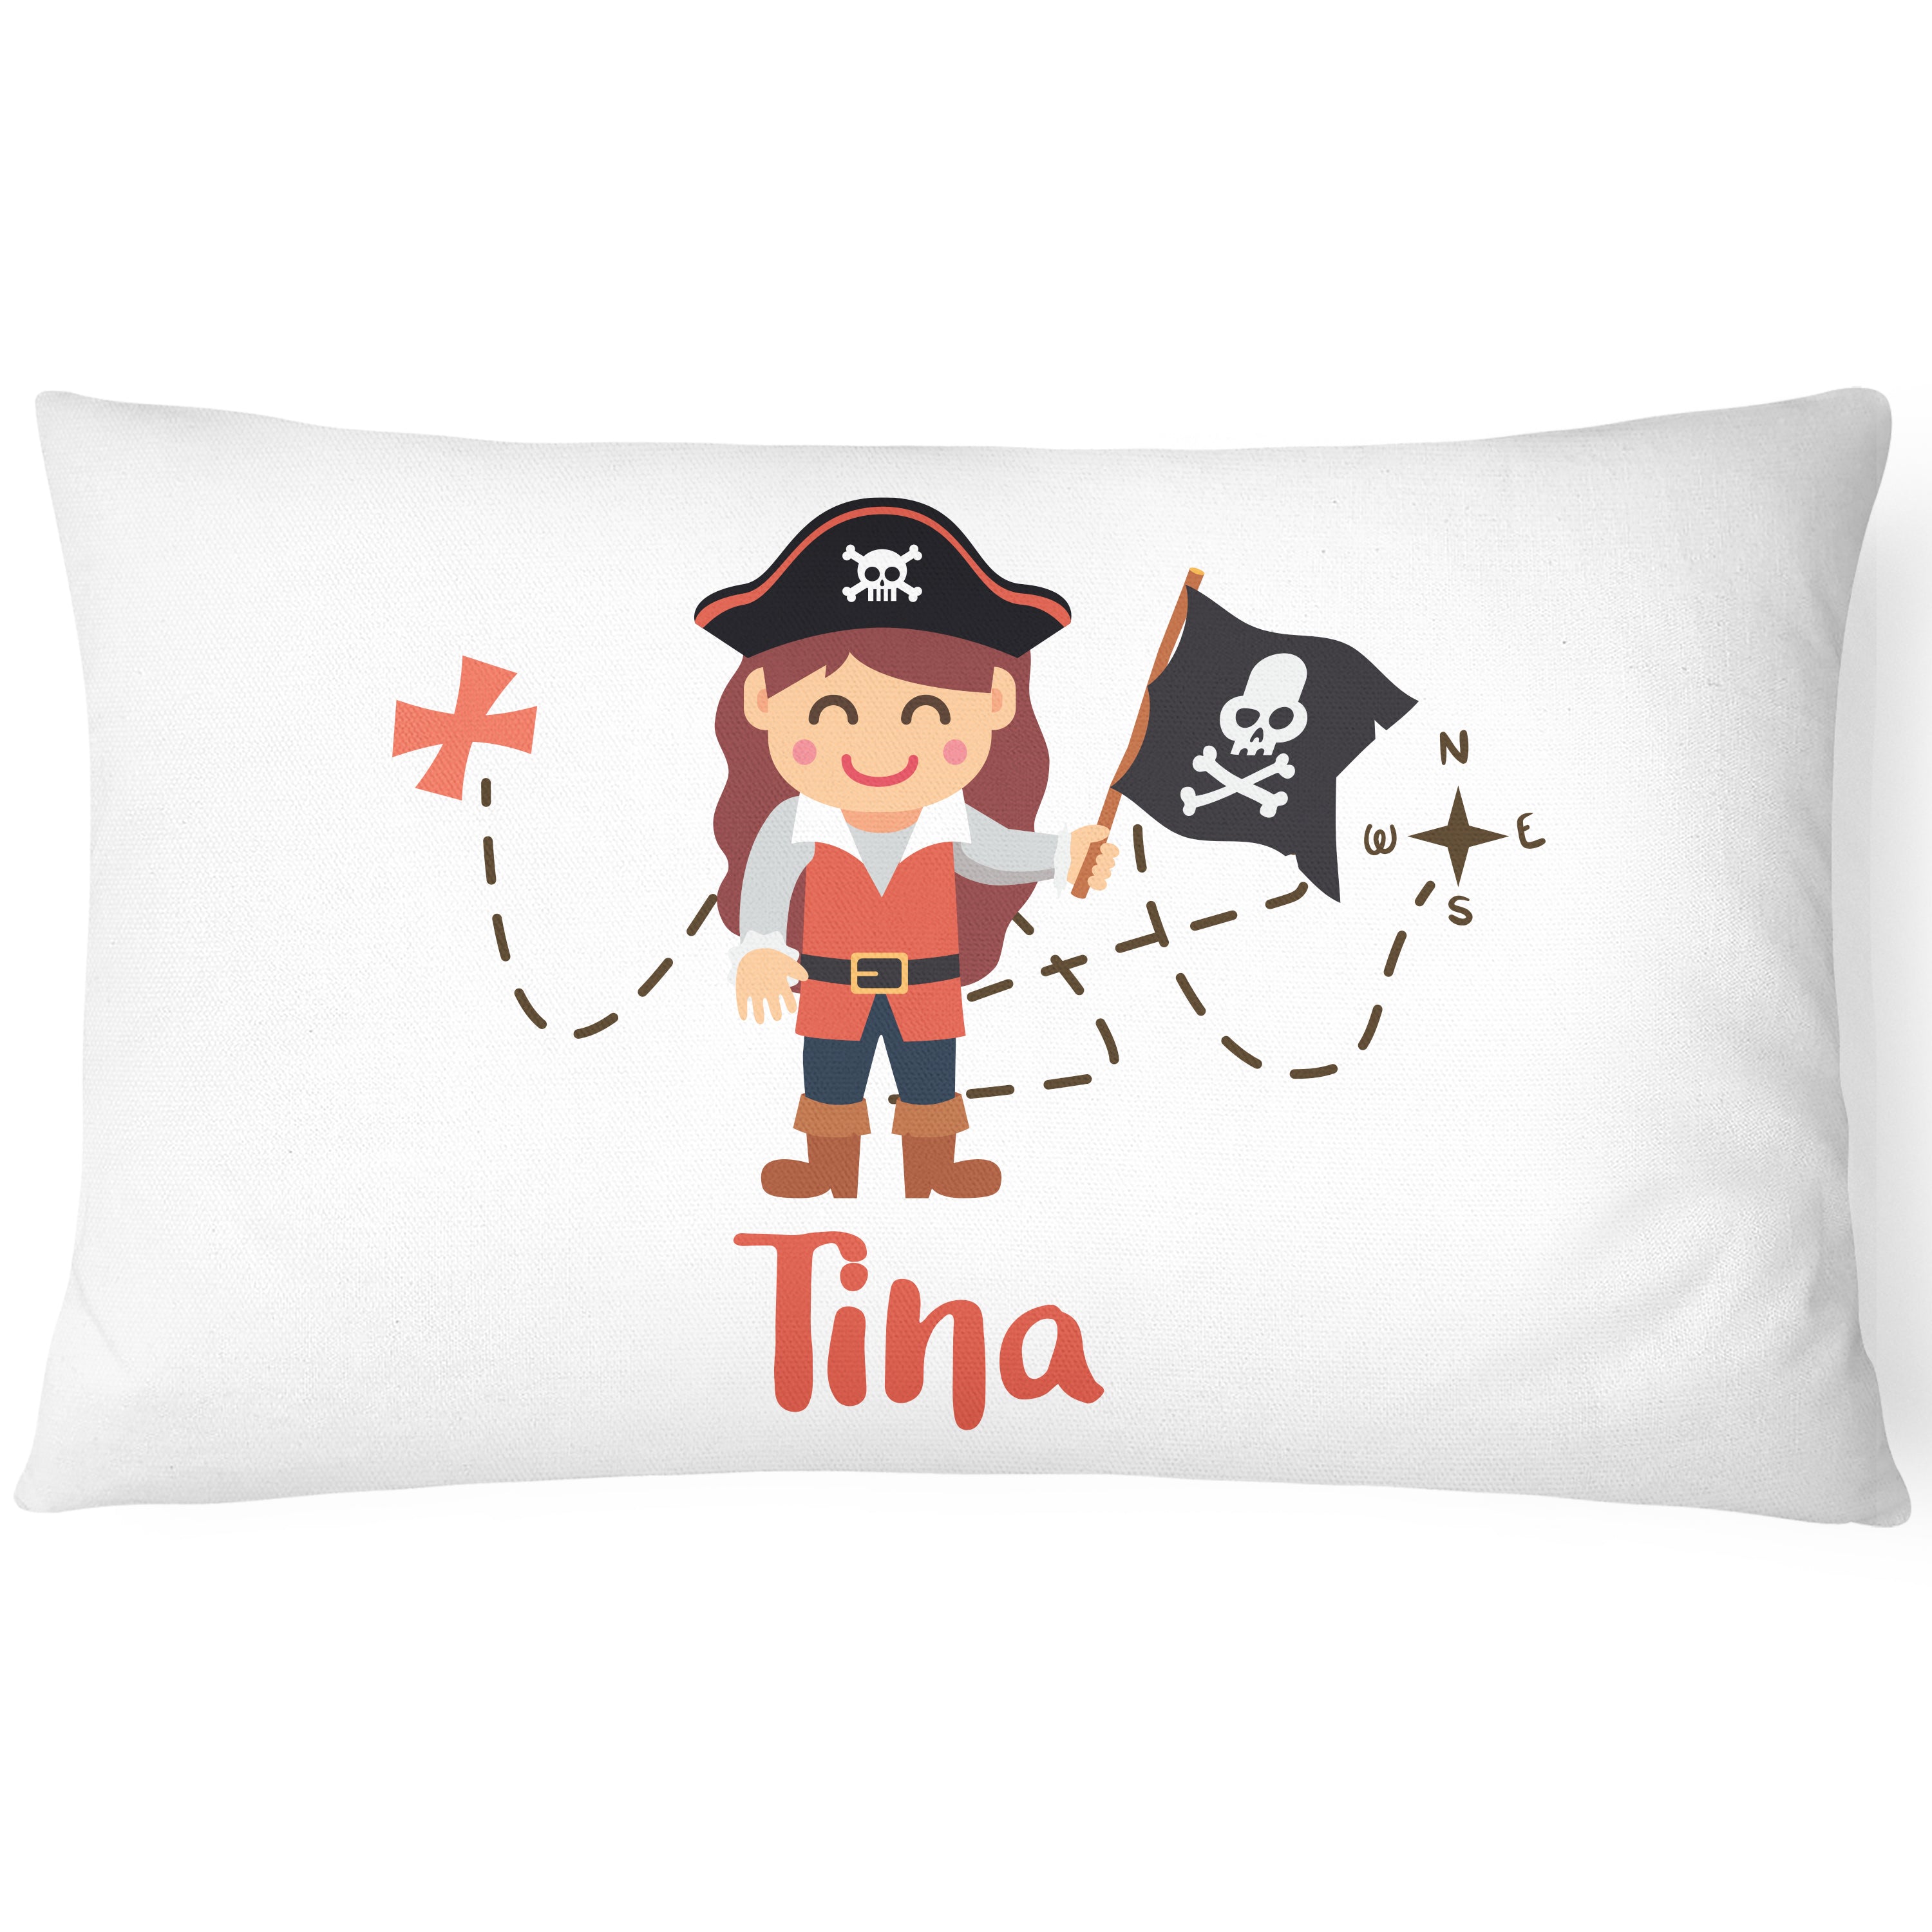 Pirate Pillowcase for Kids - Personalise With Any Name - Perfect Children's Gift - Red